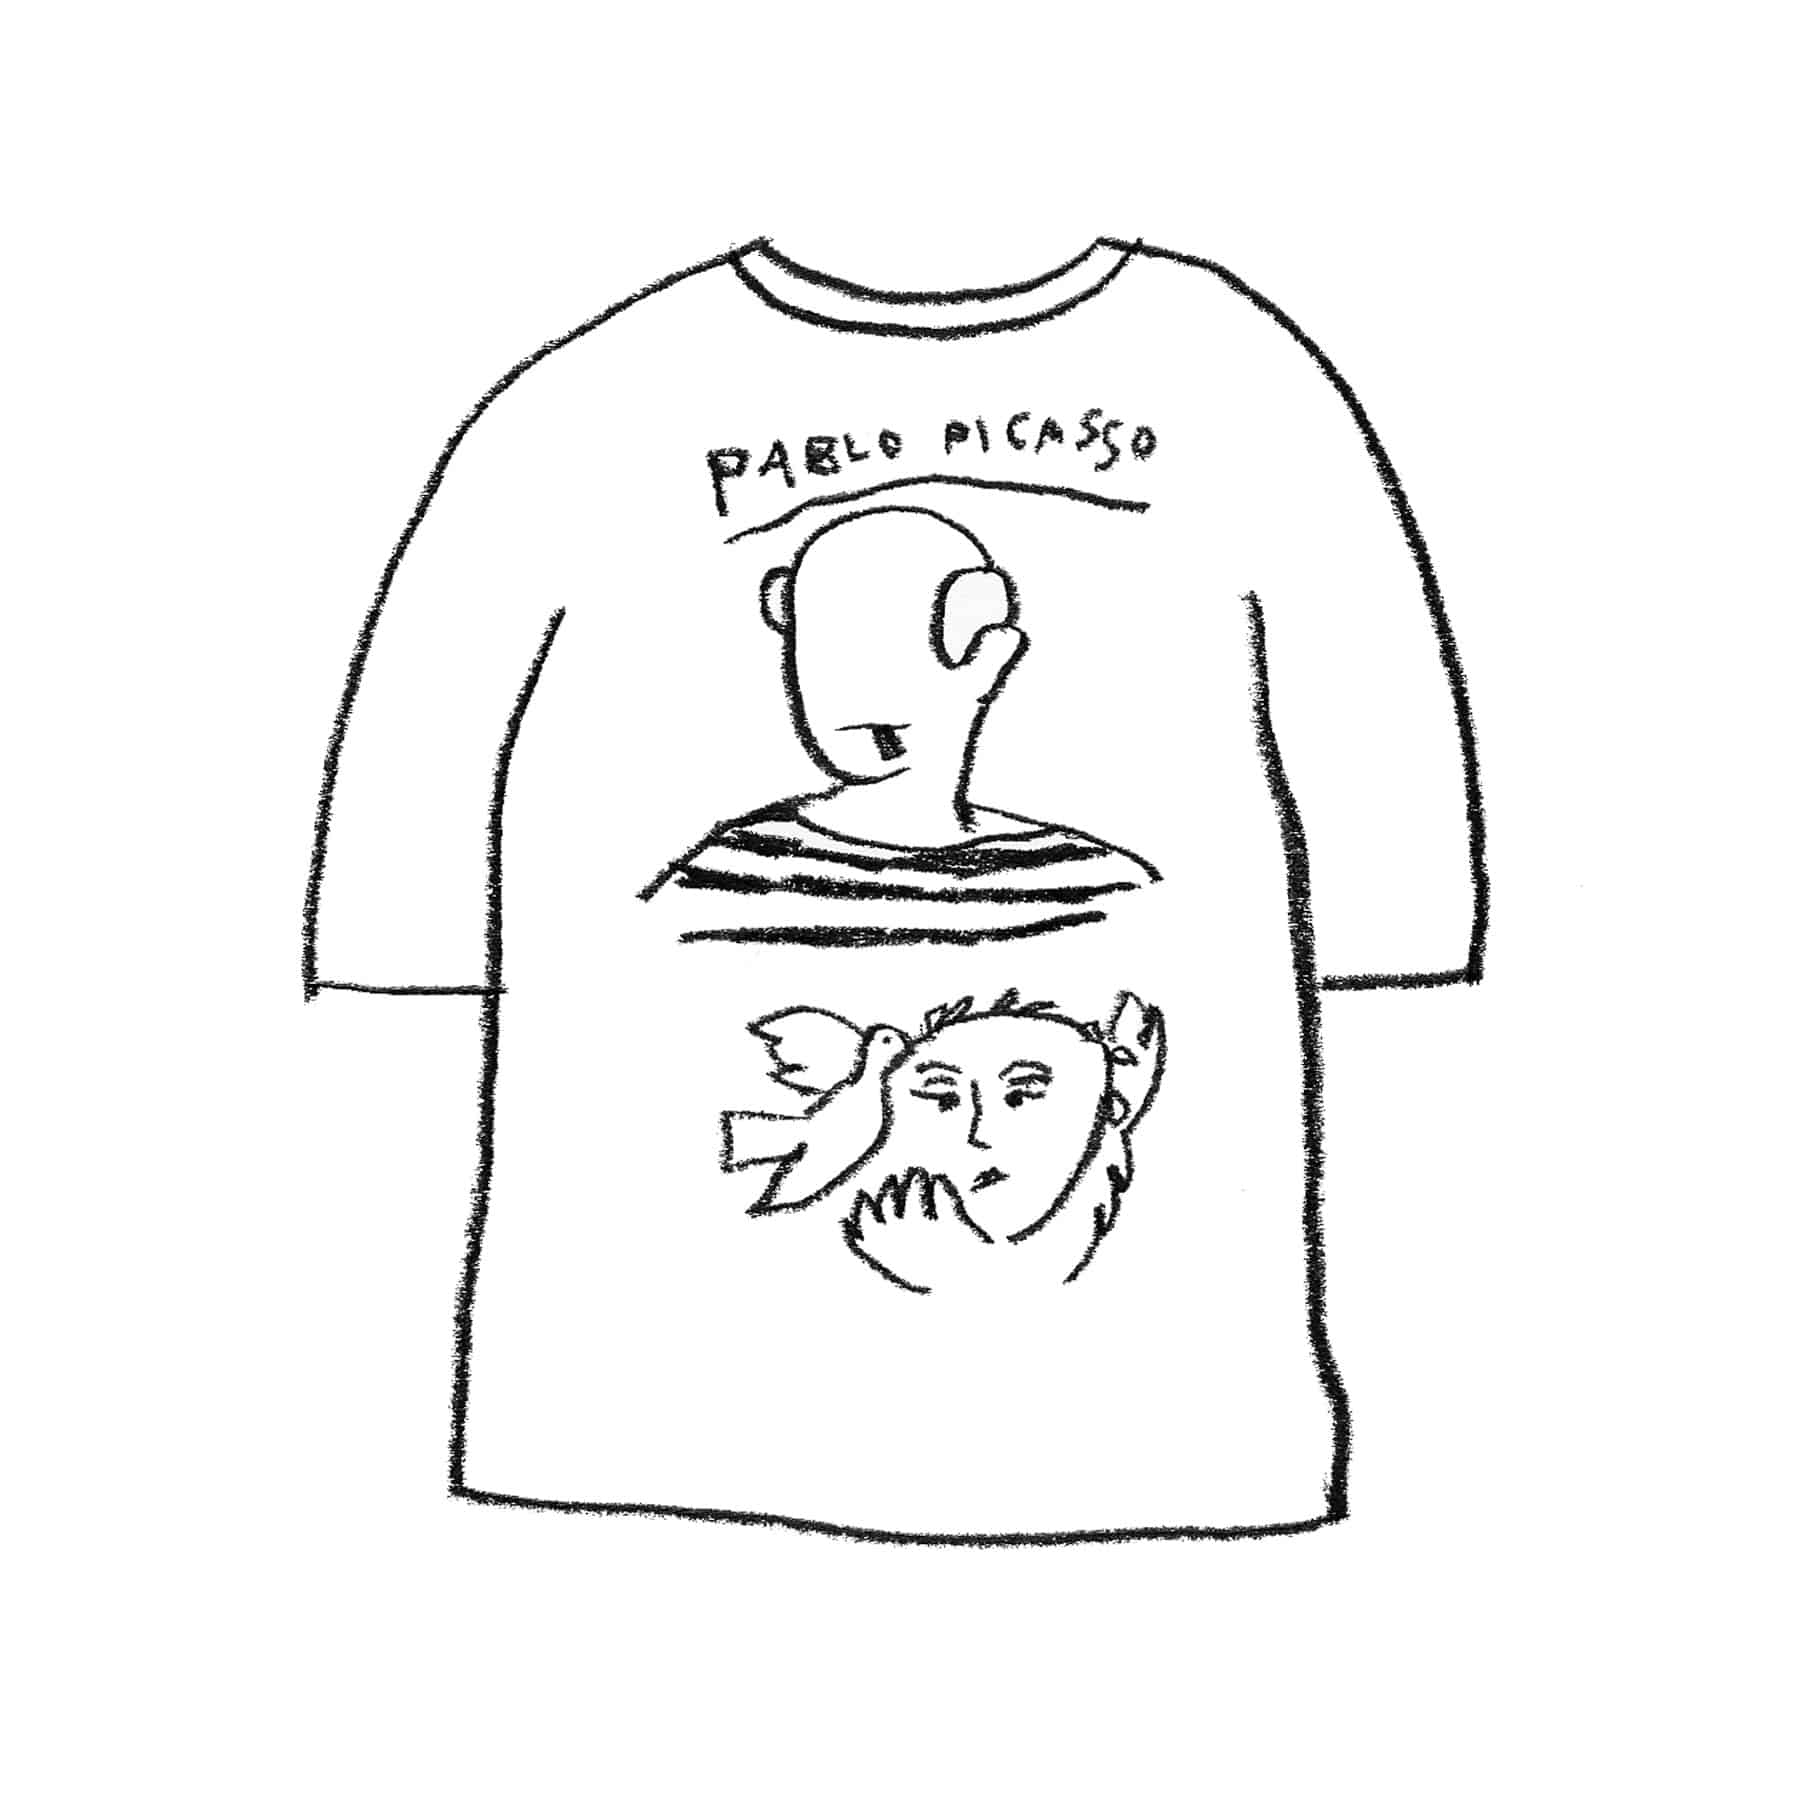 PICASSO 1/2 T-SHIRT